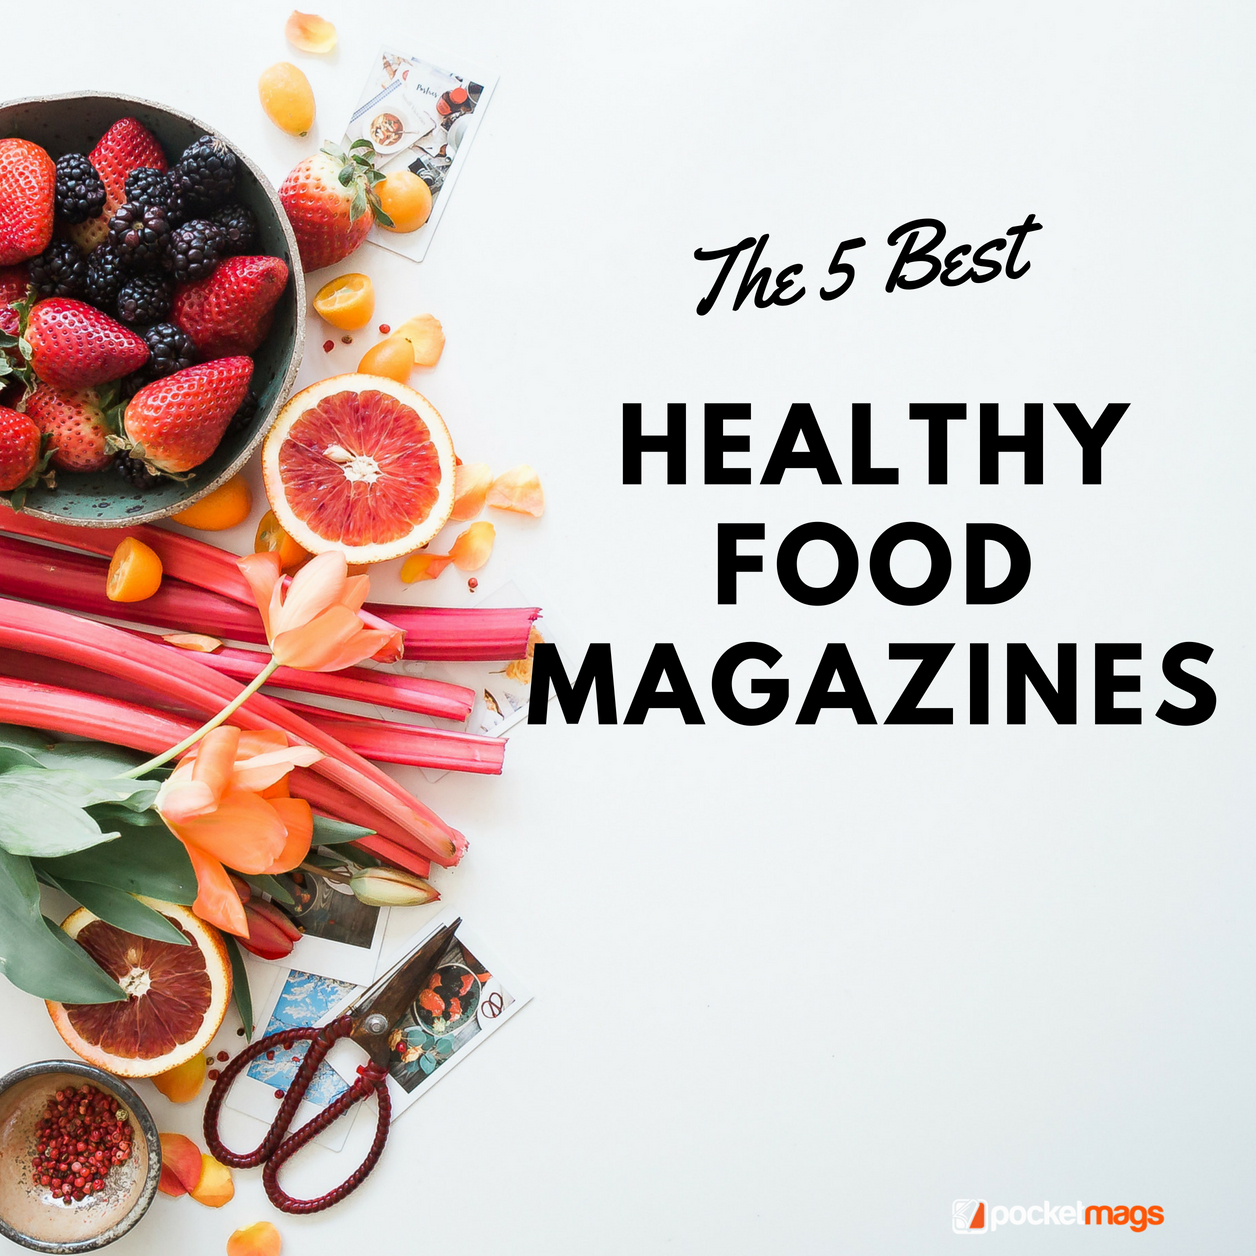 The 5 Best Healthy Food Magazines